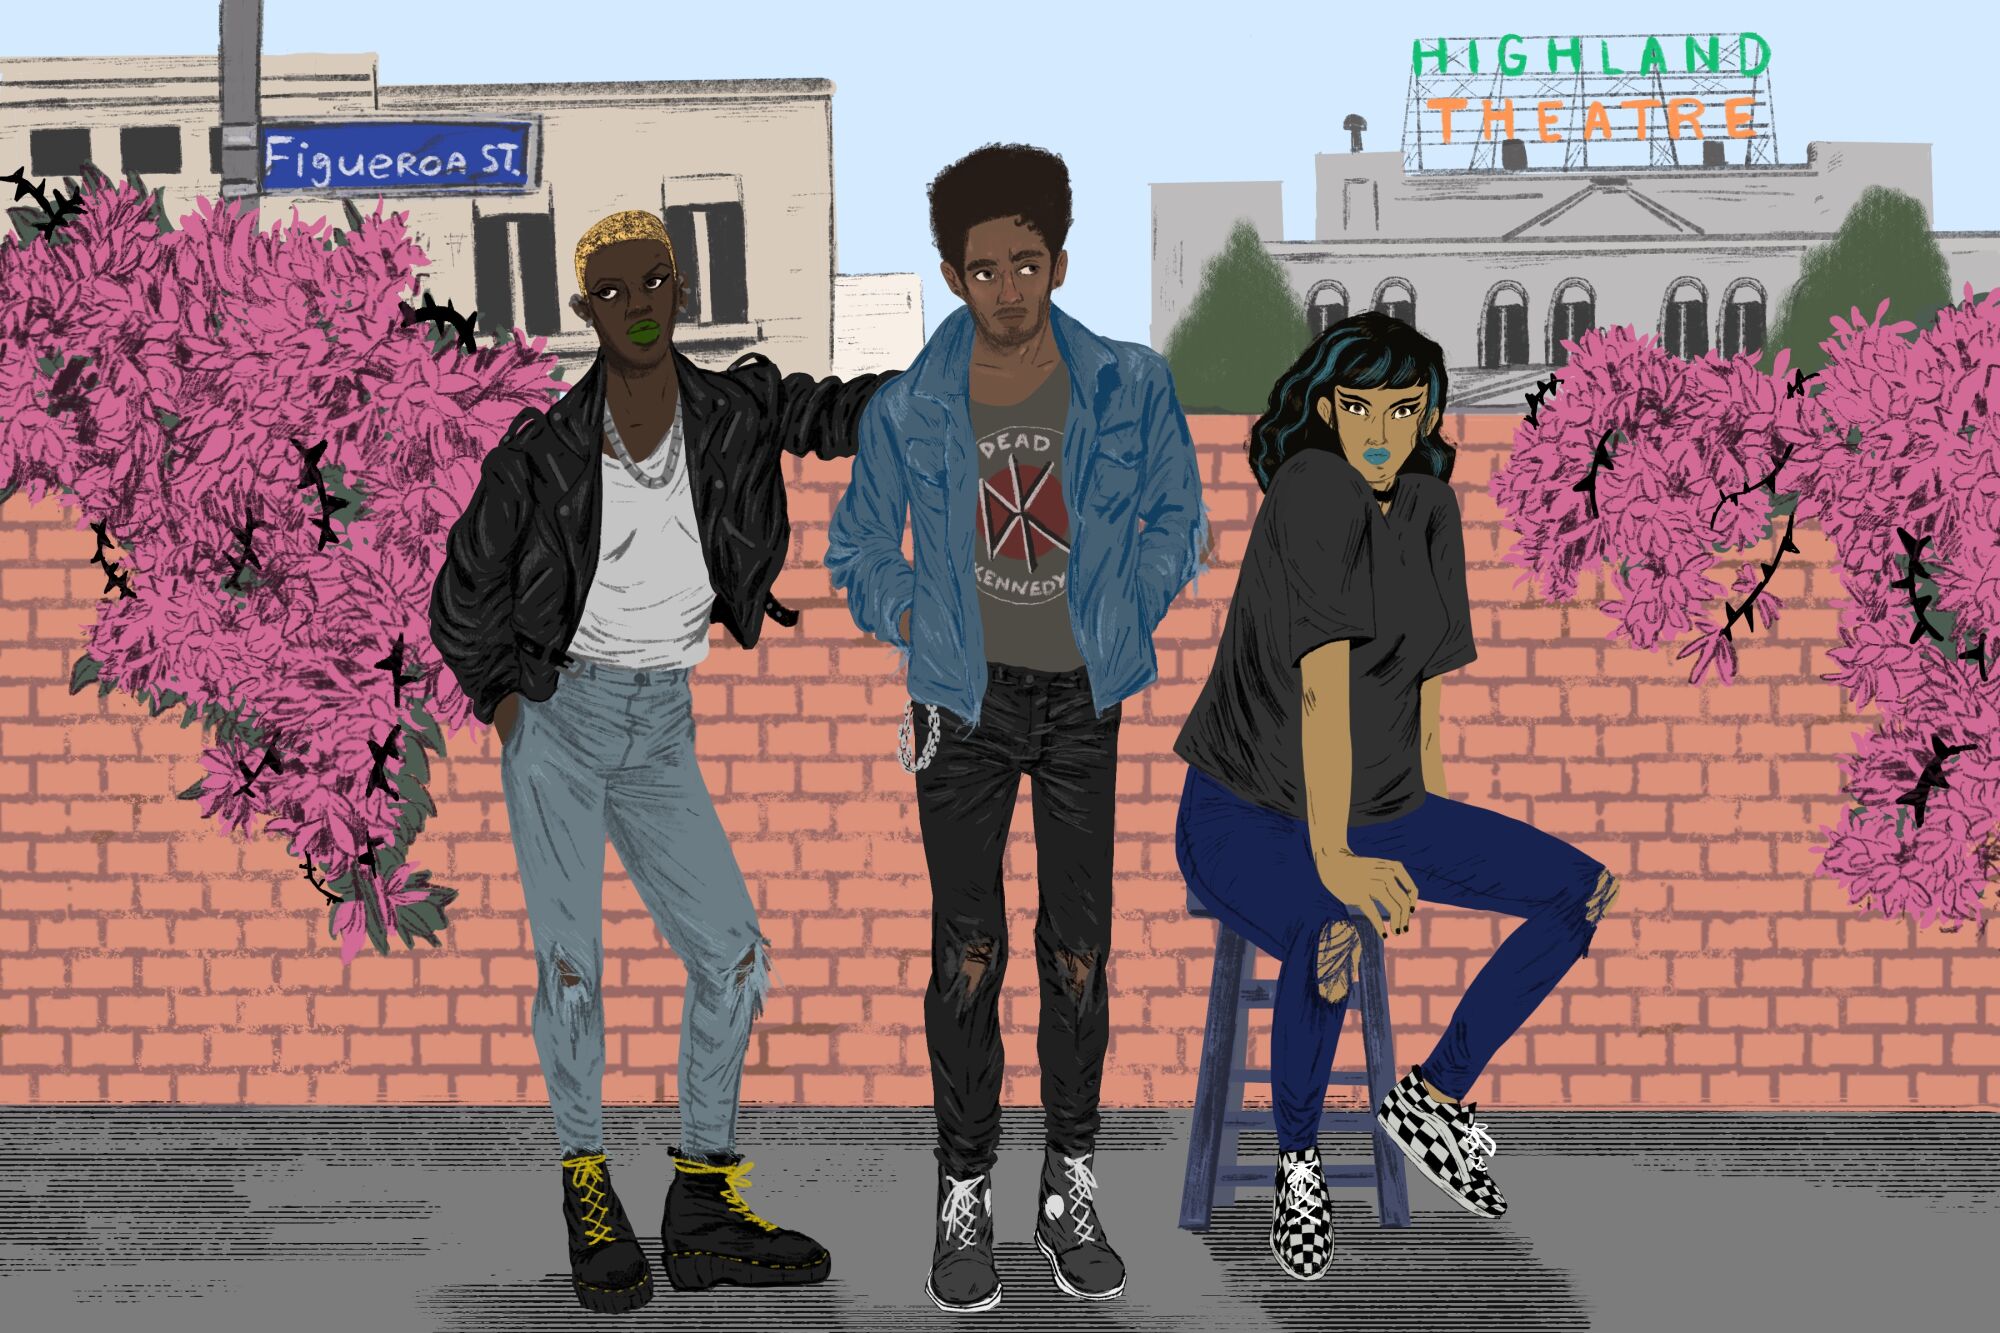 illustration of three Black and brown young people hanging out in Highland Park wearing punk aesthetic skinny jeans